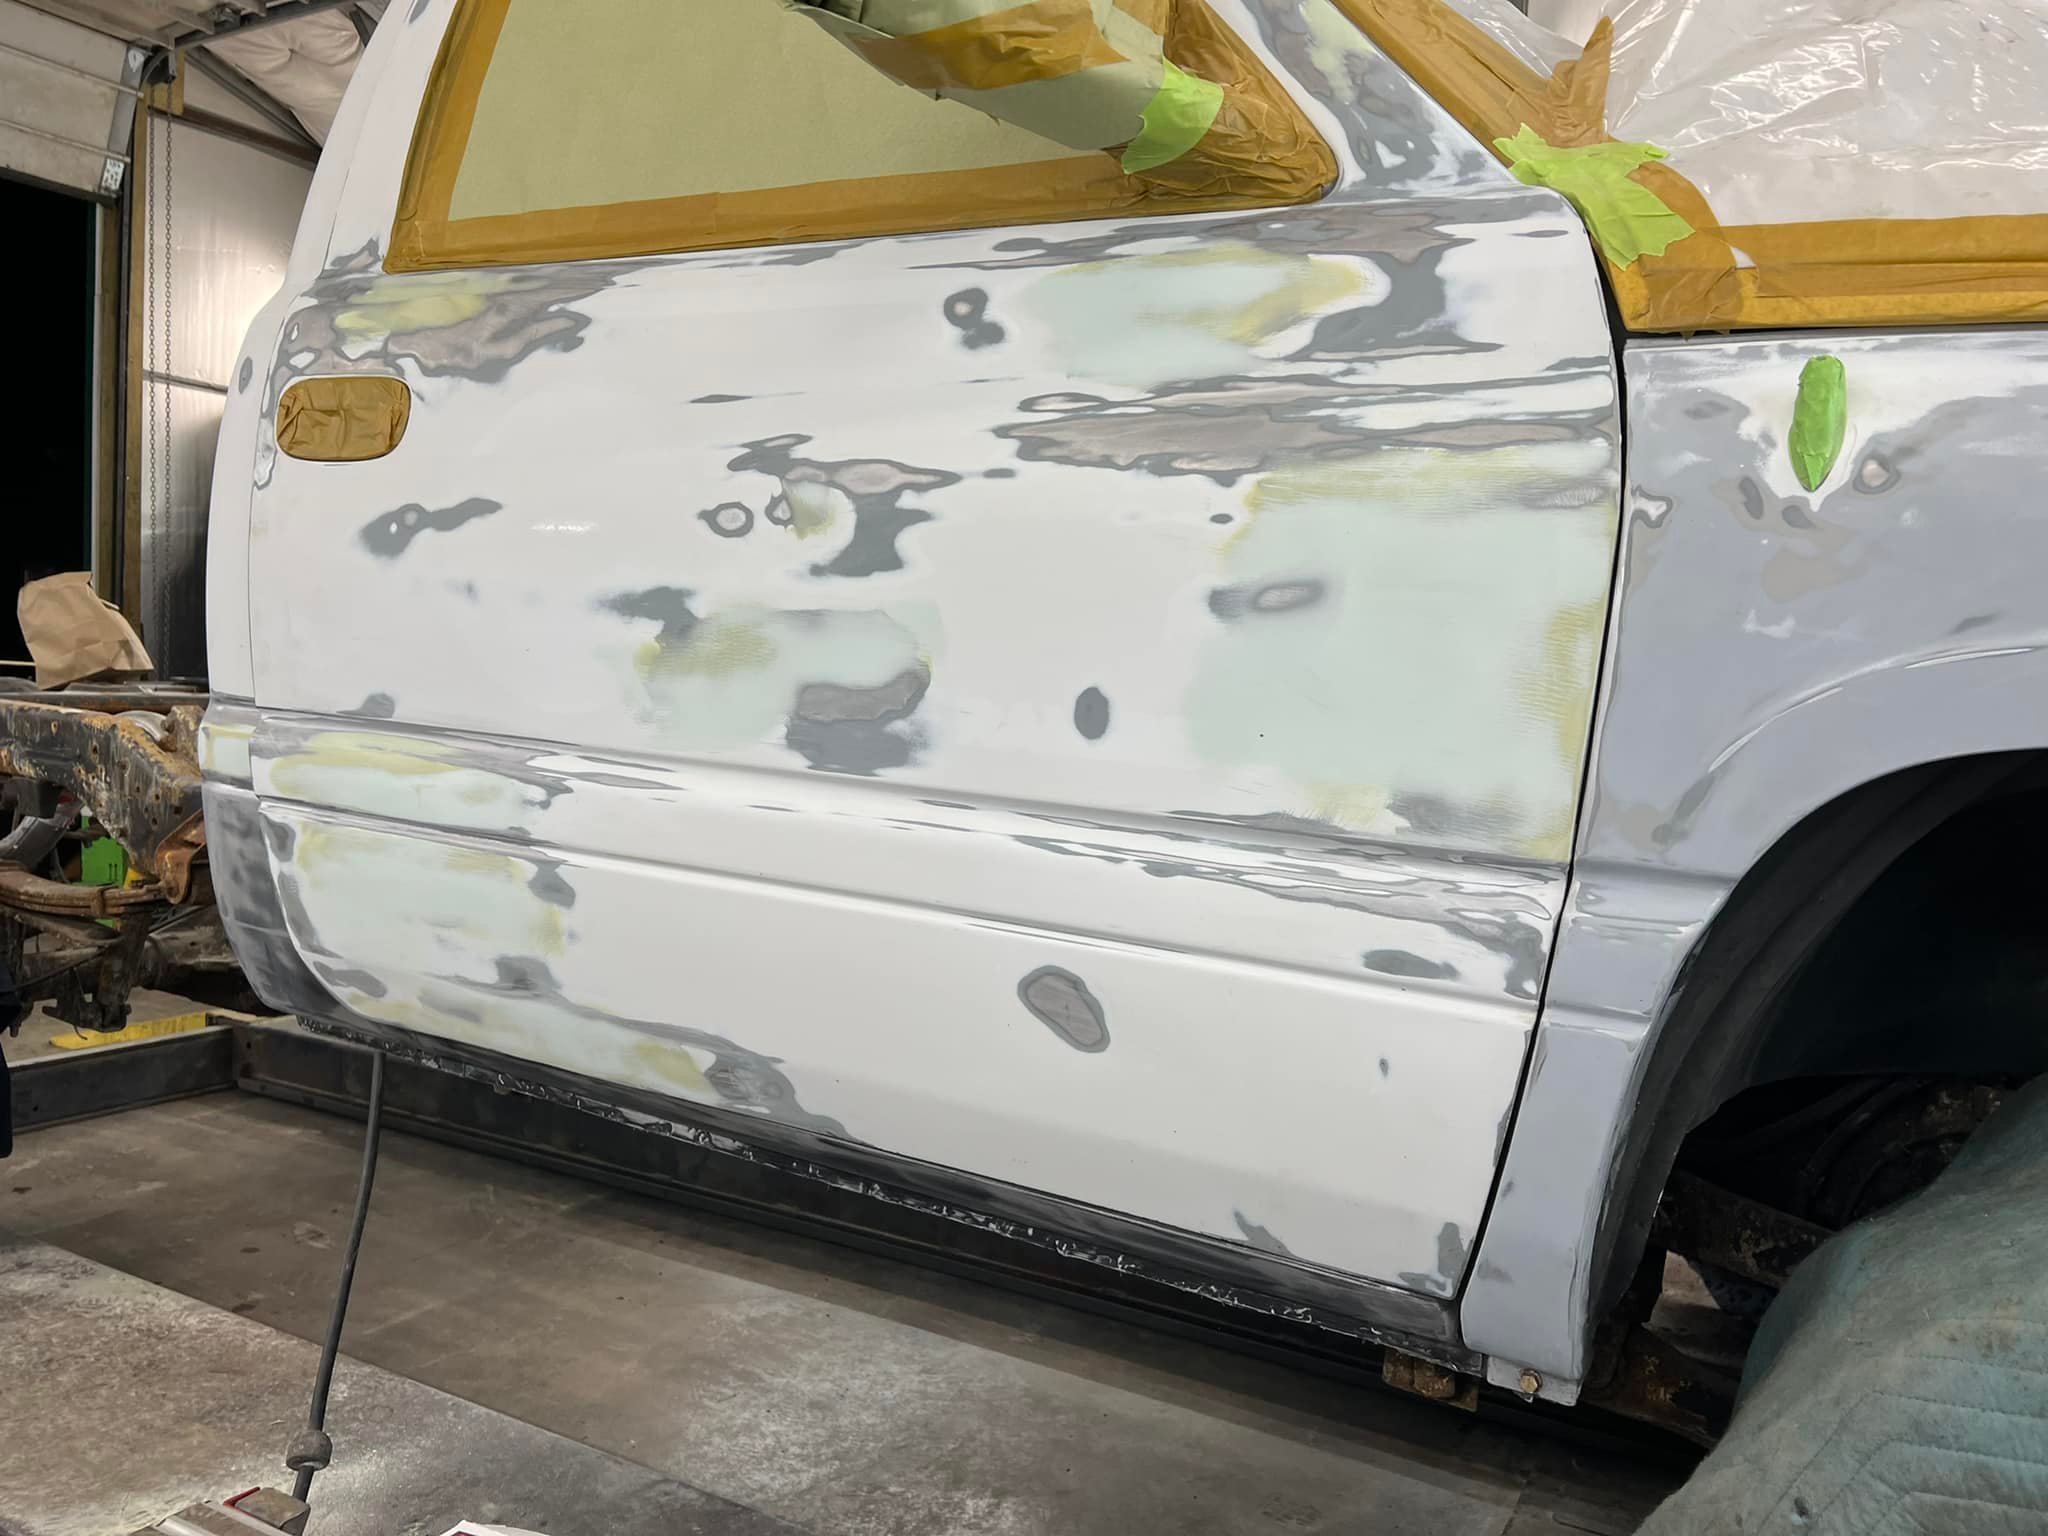 Truck body getting paint and body work